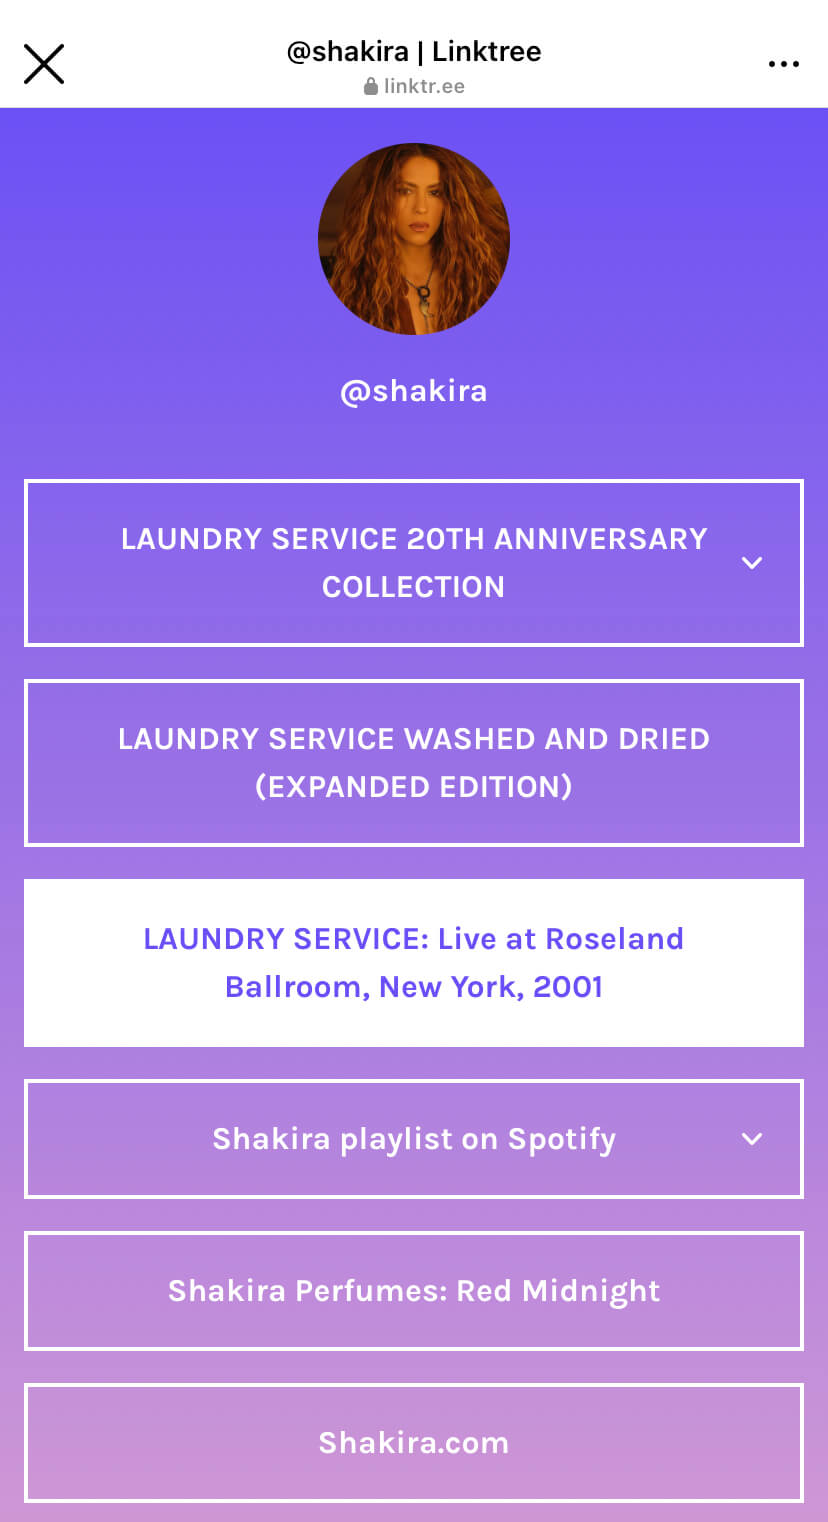 Shakira’s Linktree with links to her shop, playlist, and website